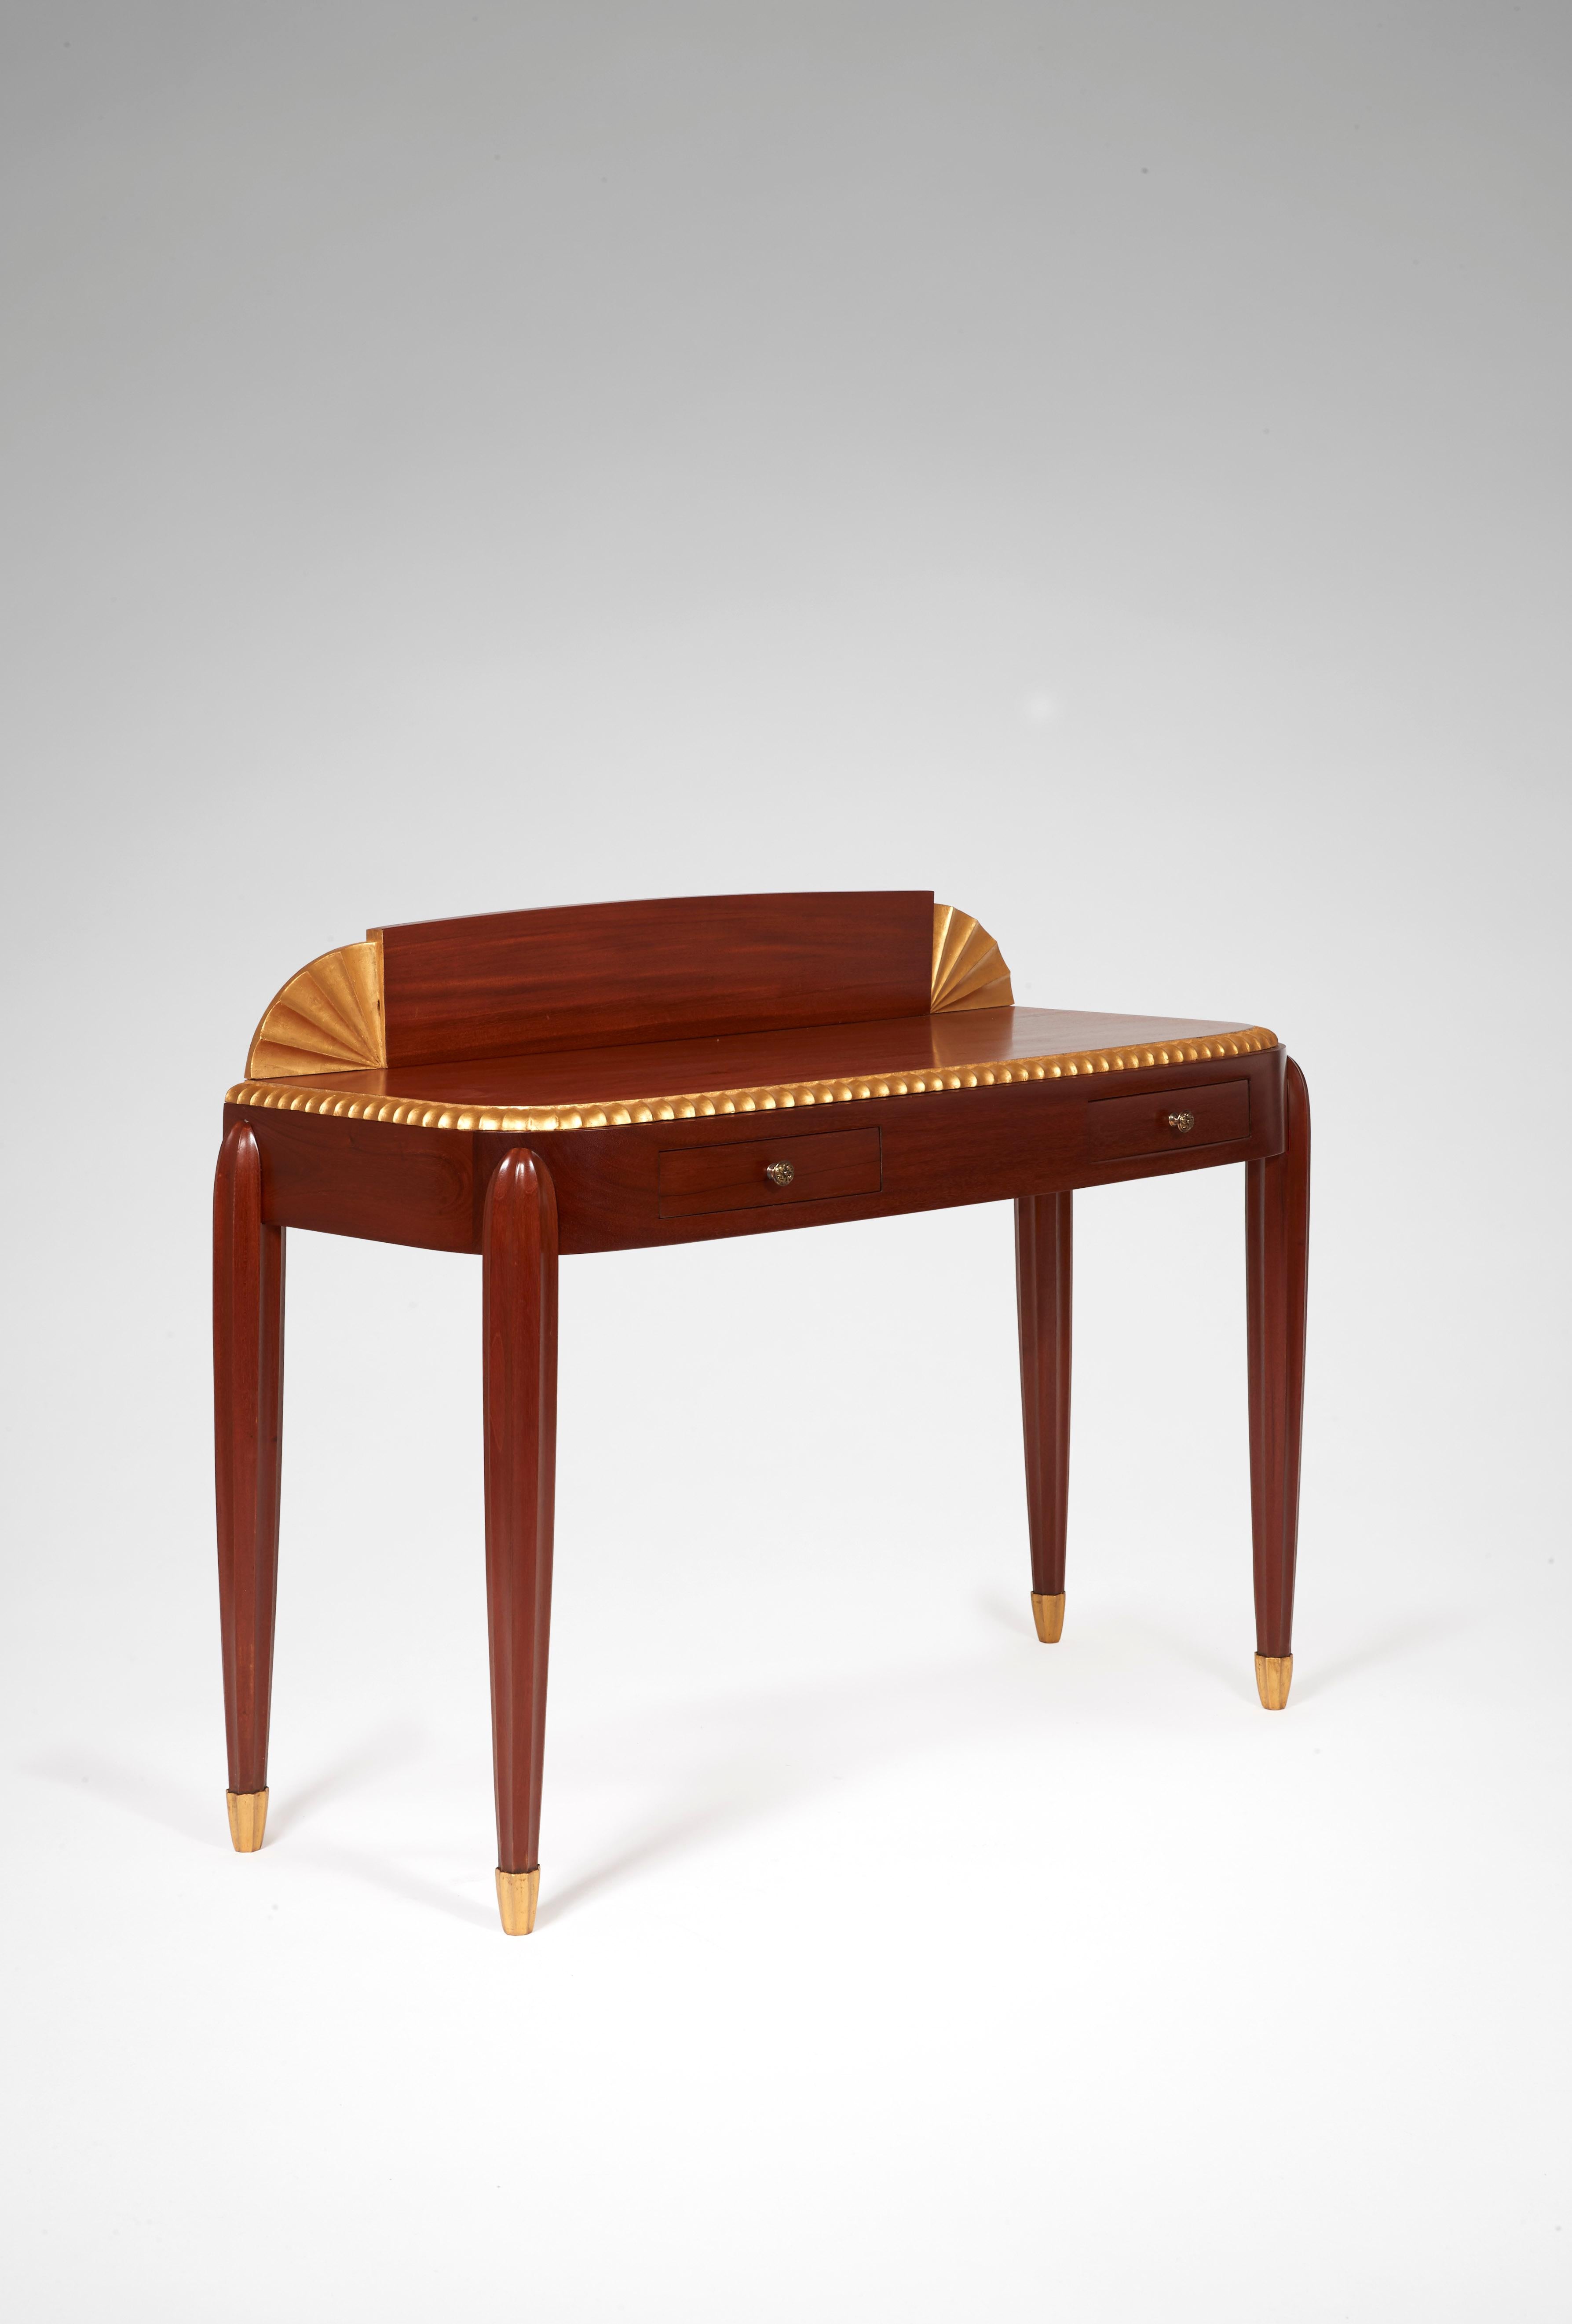 Lady's writing desk, circa 1925.

Lady's writing desk in mahogany wood opening by two drawers in the belt, with a rectangular round-angled tray decorated with a notched upper frieze, ornamented with a shelf with handheld fans on both sides.